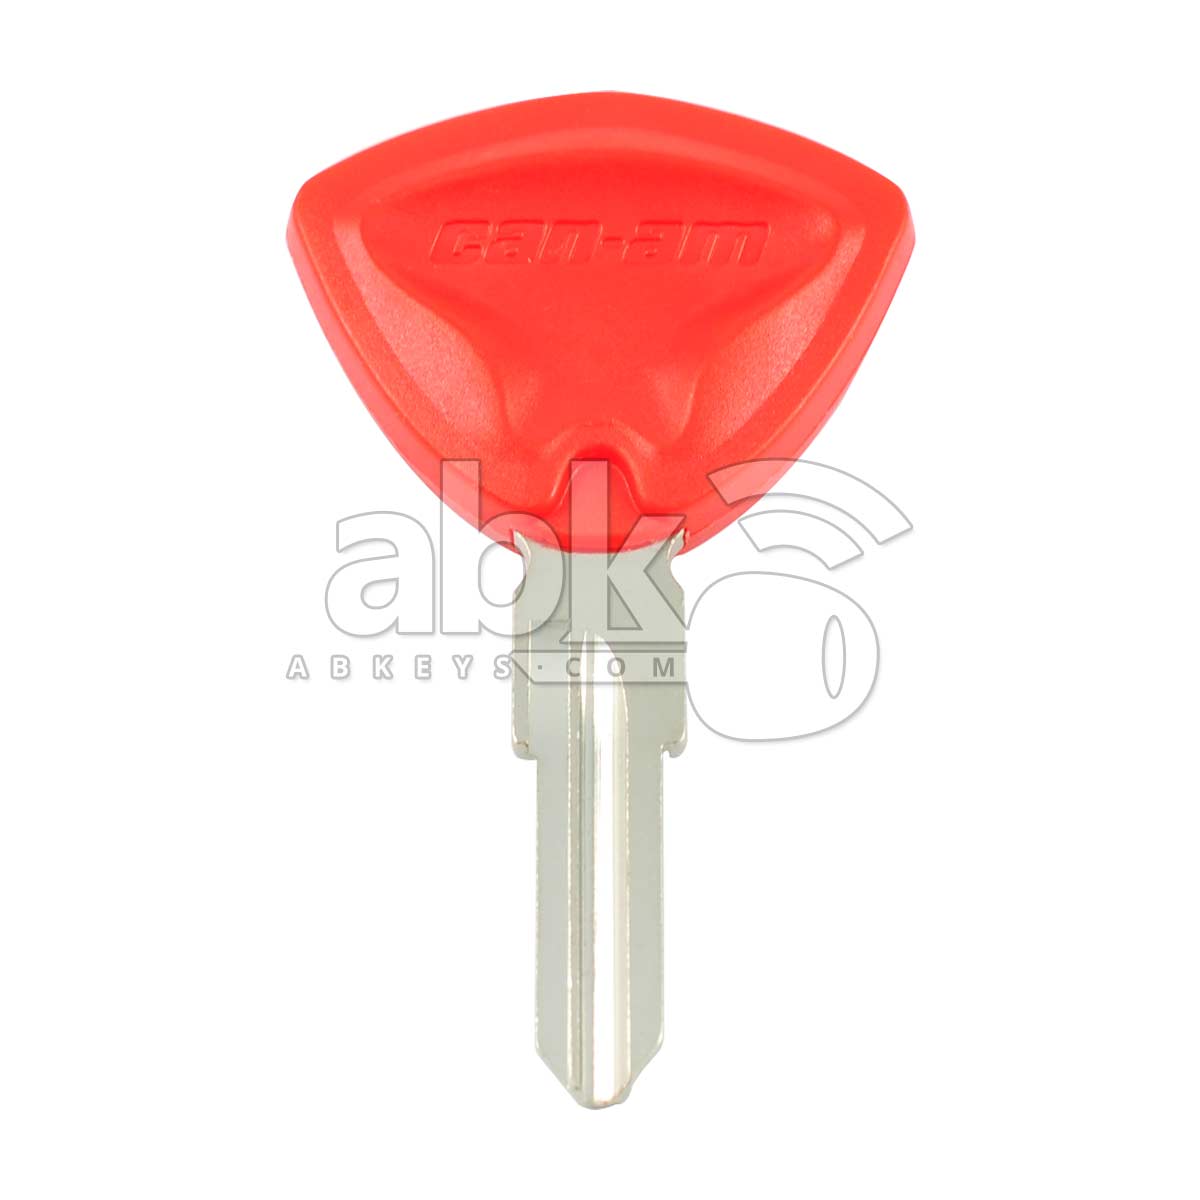 Can-Am Bombardier Motorcycle Key ZD24R Red - ABK-669 - ABKEYS.COM